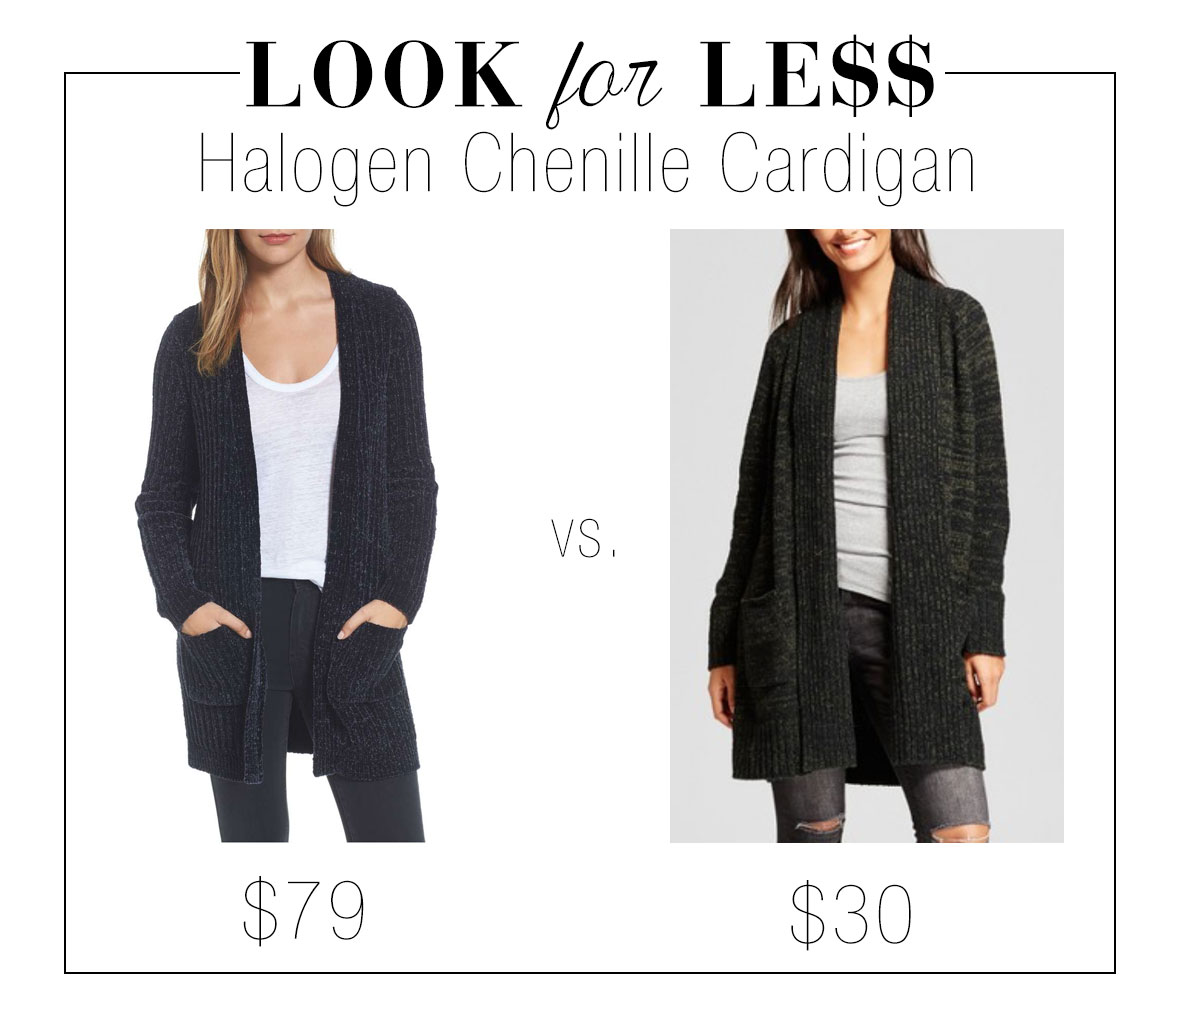 Try a chenille cardigan for a cozy yet pulled together fall look.